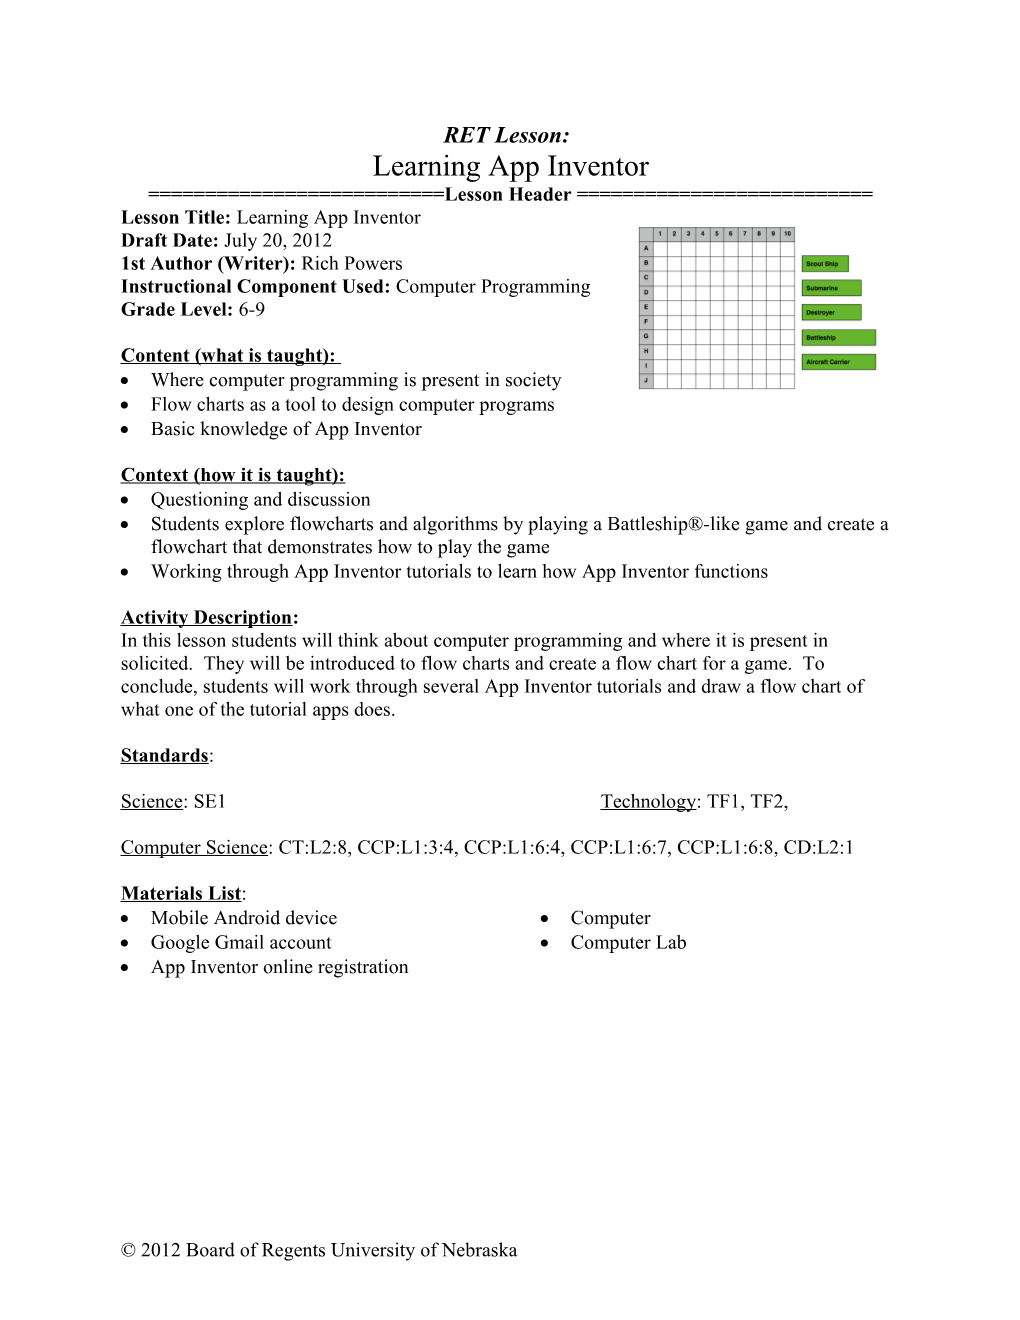 Learning App Inventor